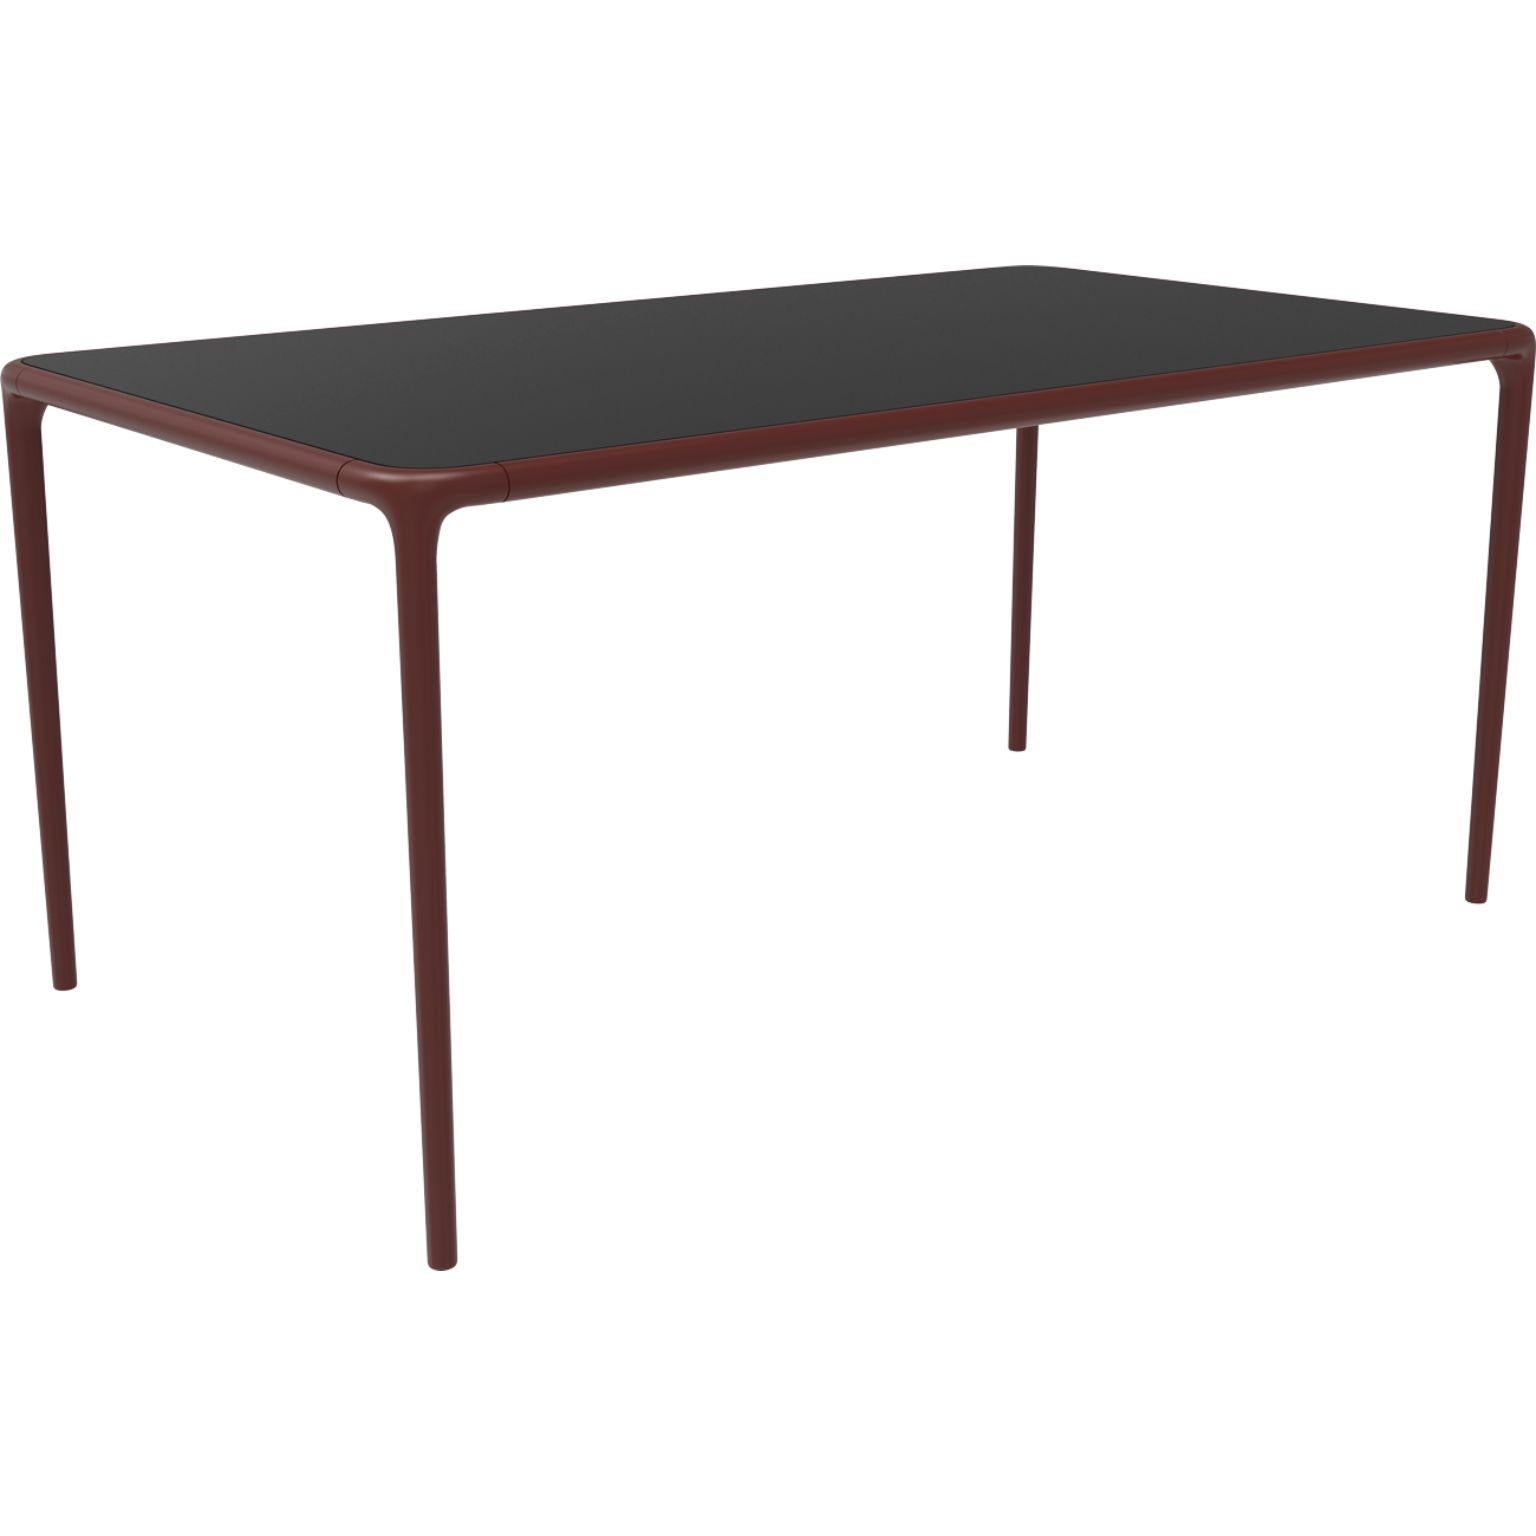 Xaloc burgundy glass top table 160 by MOWEE
Dimensions: D160 x W90 x H74 cm
Material: Aluminum, tinted tempered glass top.
Also available in different aluminum colors and finishes (HPL Black Edge or Neolith). 

 Xaloc synthesizes the lines of